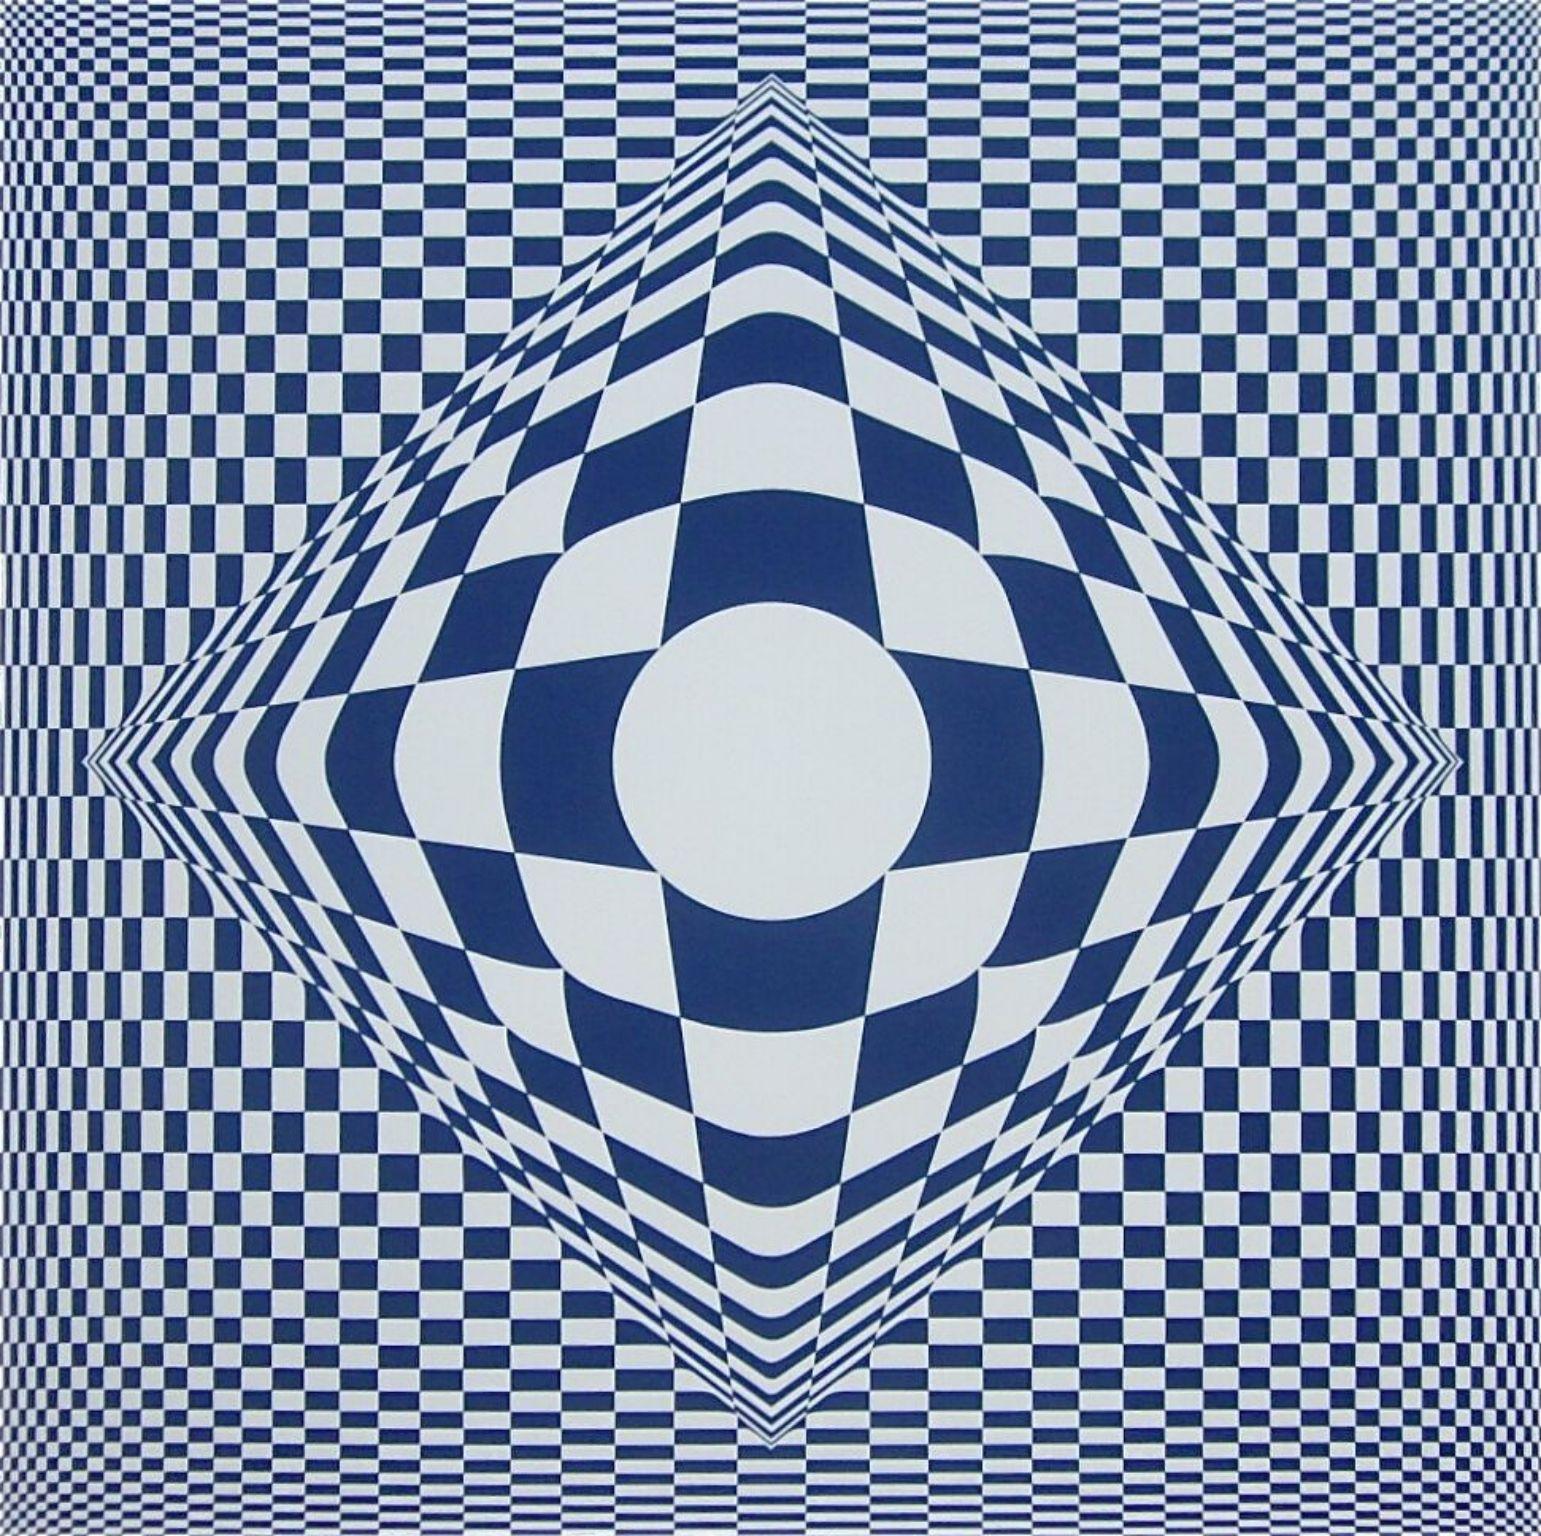 VICTOR VASARELY (1908-1997) Internationally recognized as one of the most important artists of the 20th century. He is the acknowledged leader of the Op Art movement, and his innovations in color and optical illusion have had a strong influence on